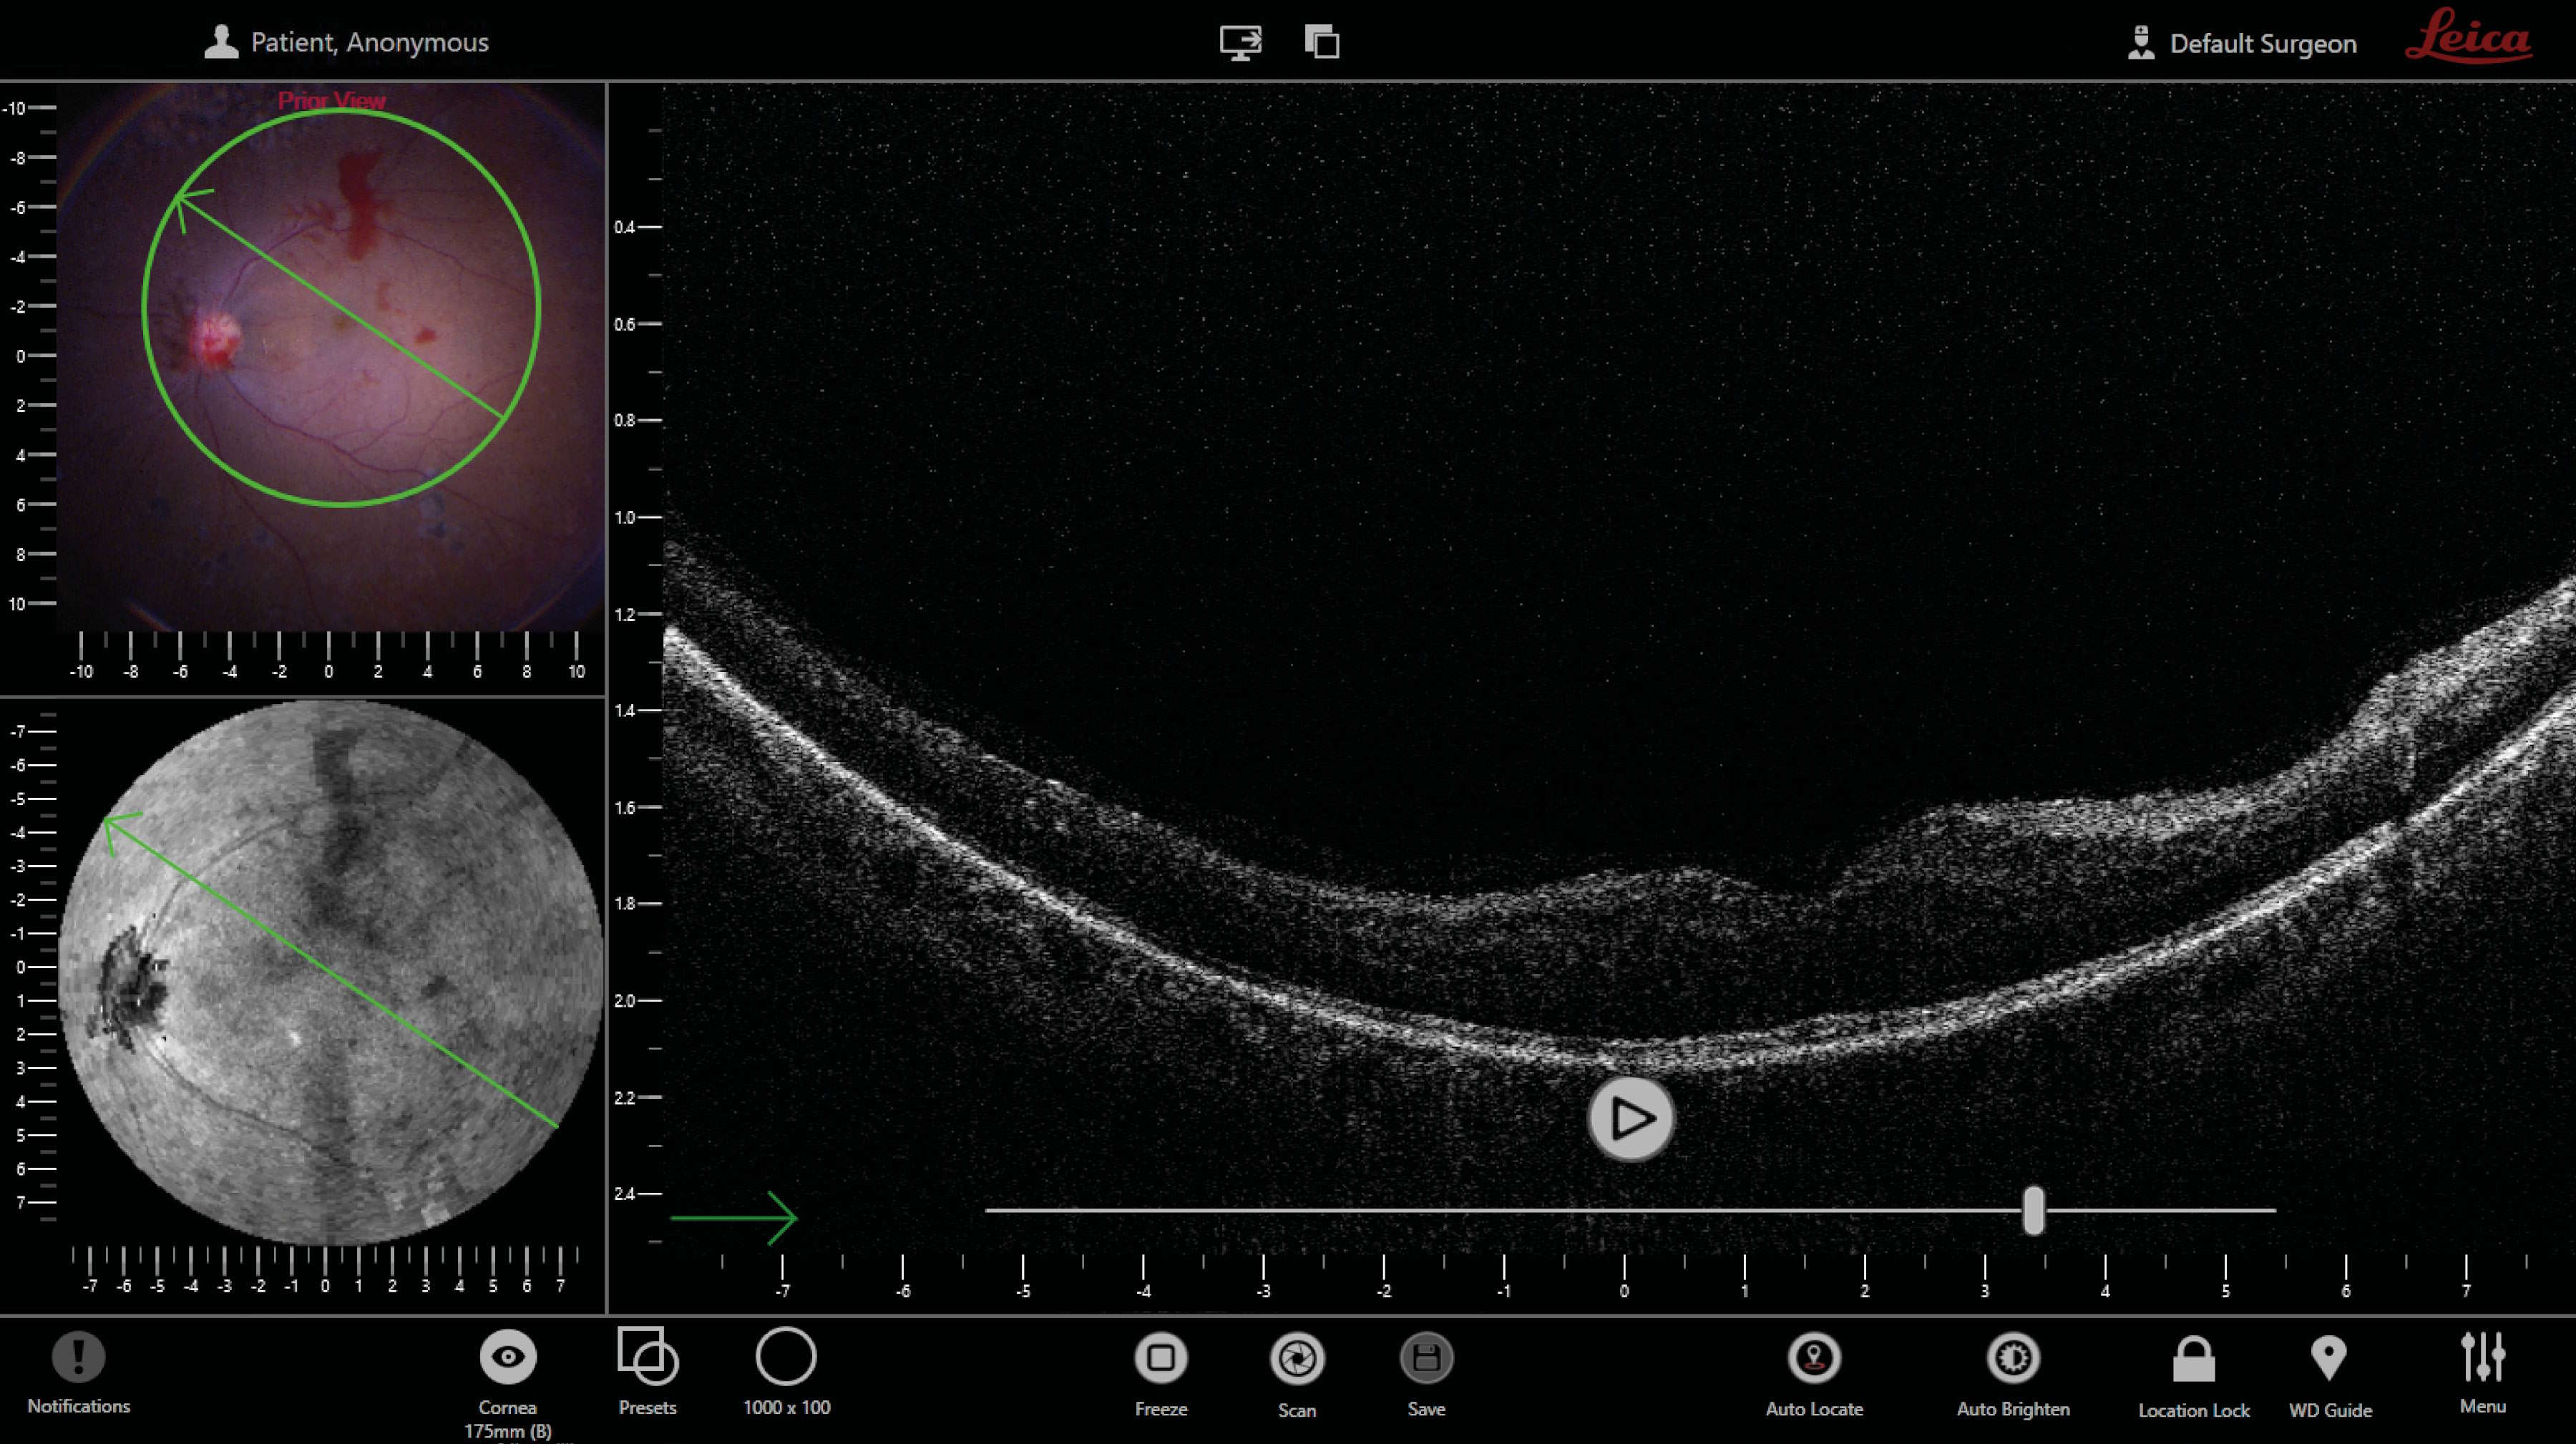 OCT quad view: surgical view (1); en face view (2); OCT b-scan view (3).